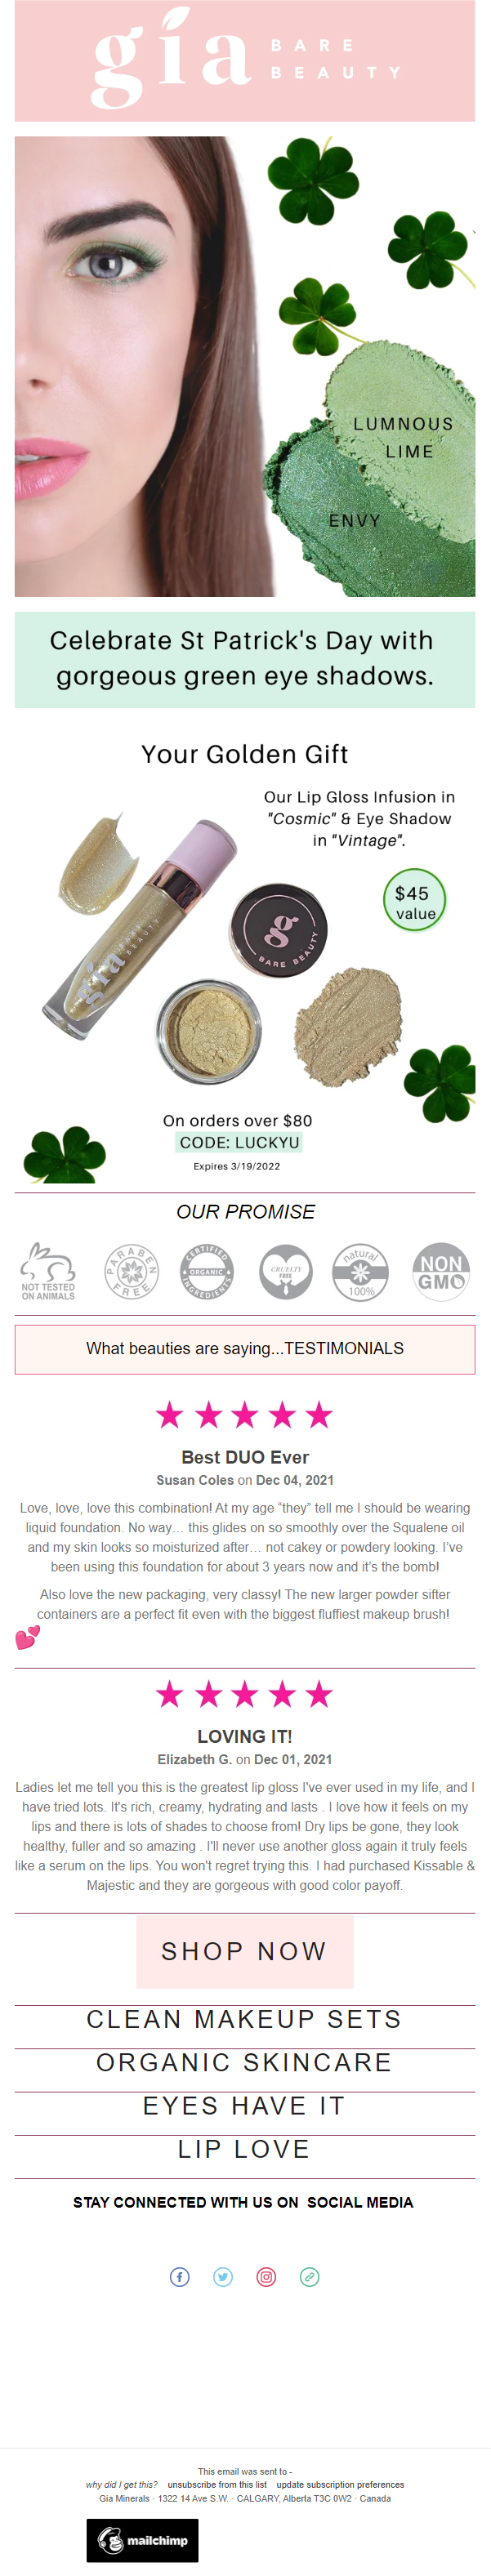 gia-minerals- St Patrick’s Day email